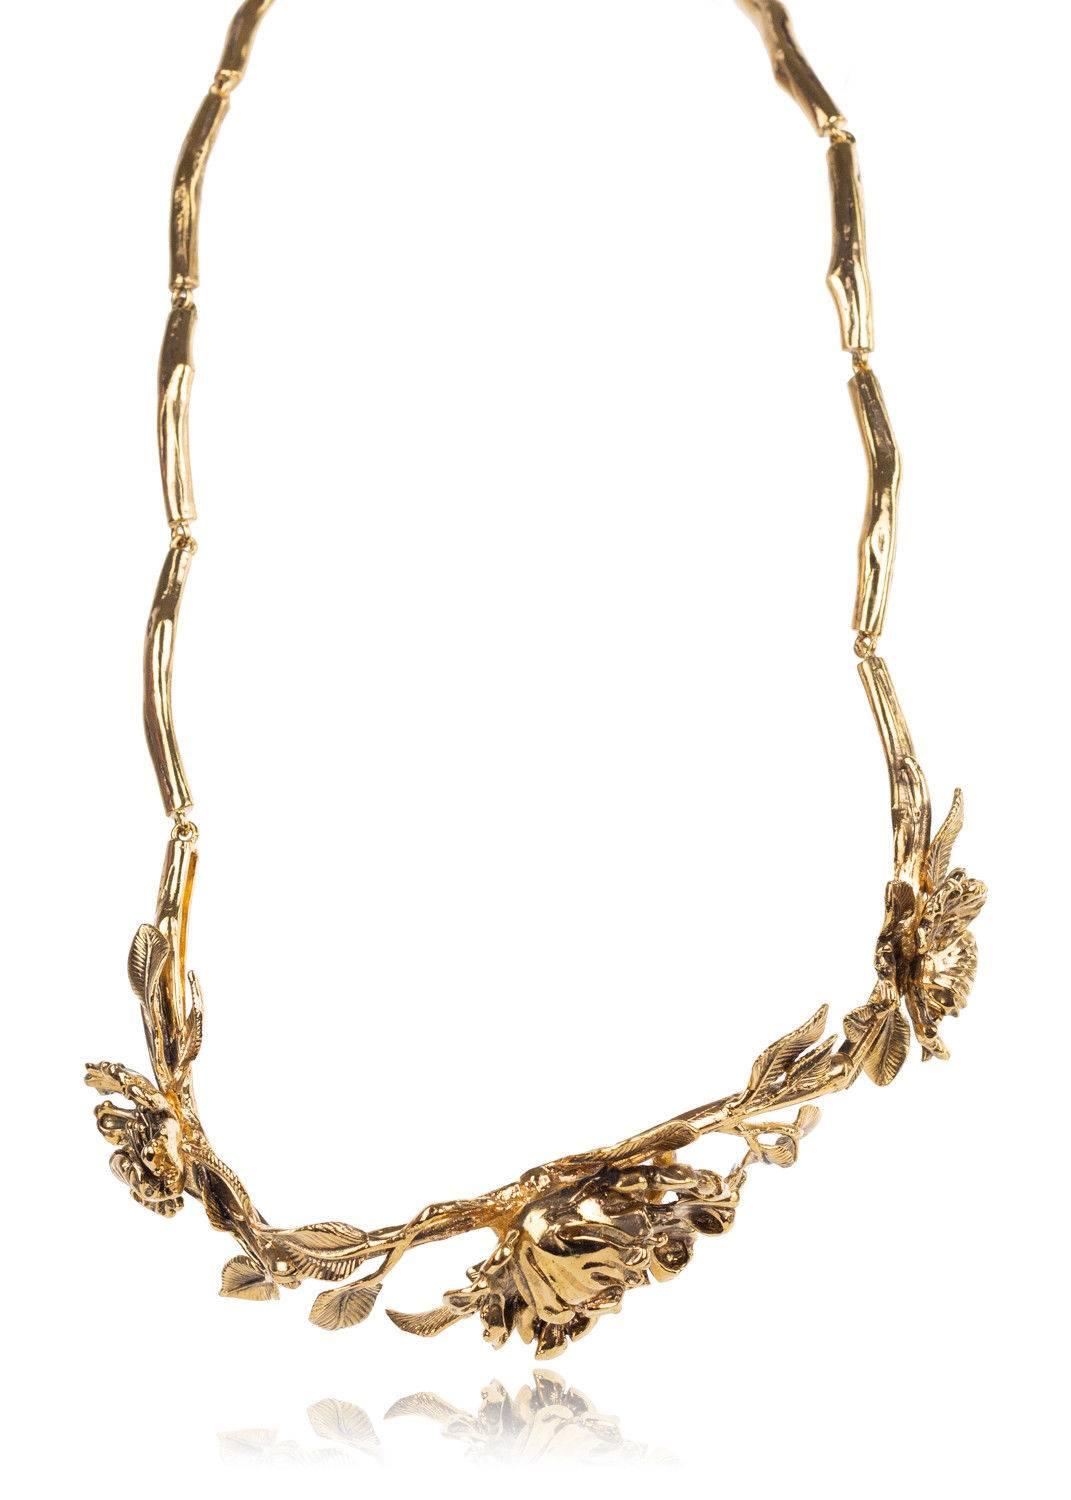 Roberto Cavalli Blossom Metal Gold Plated Belt  In New Condition For Sale In Brooklyn, NY